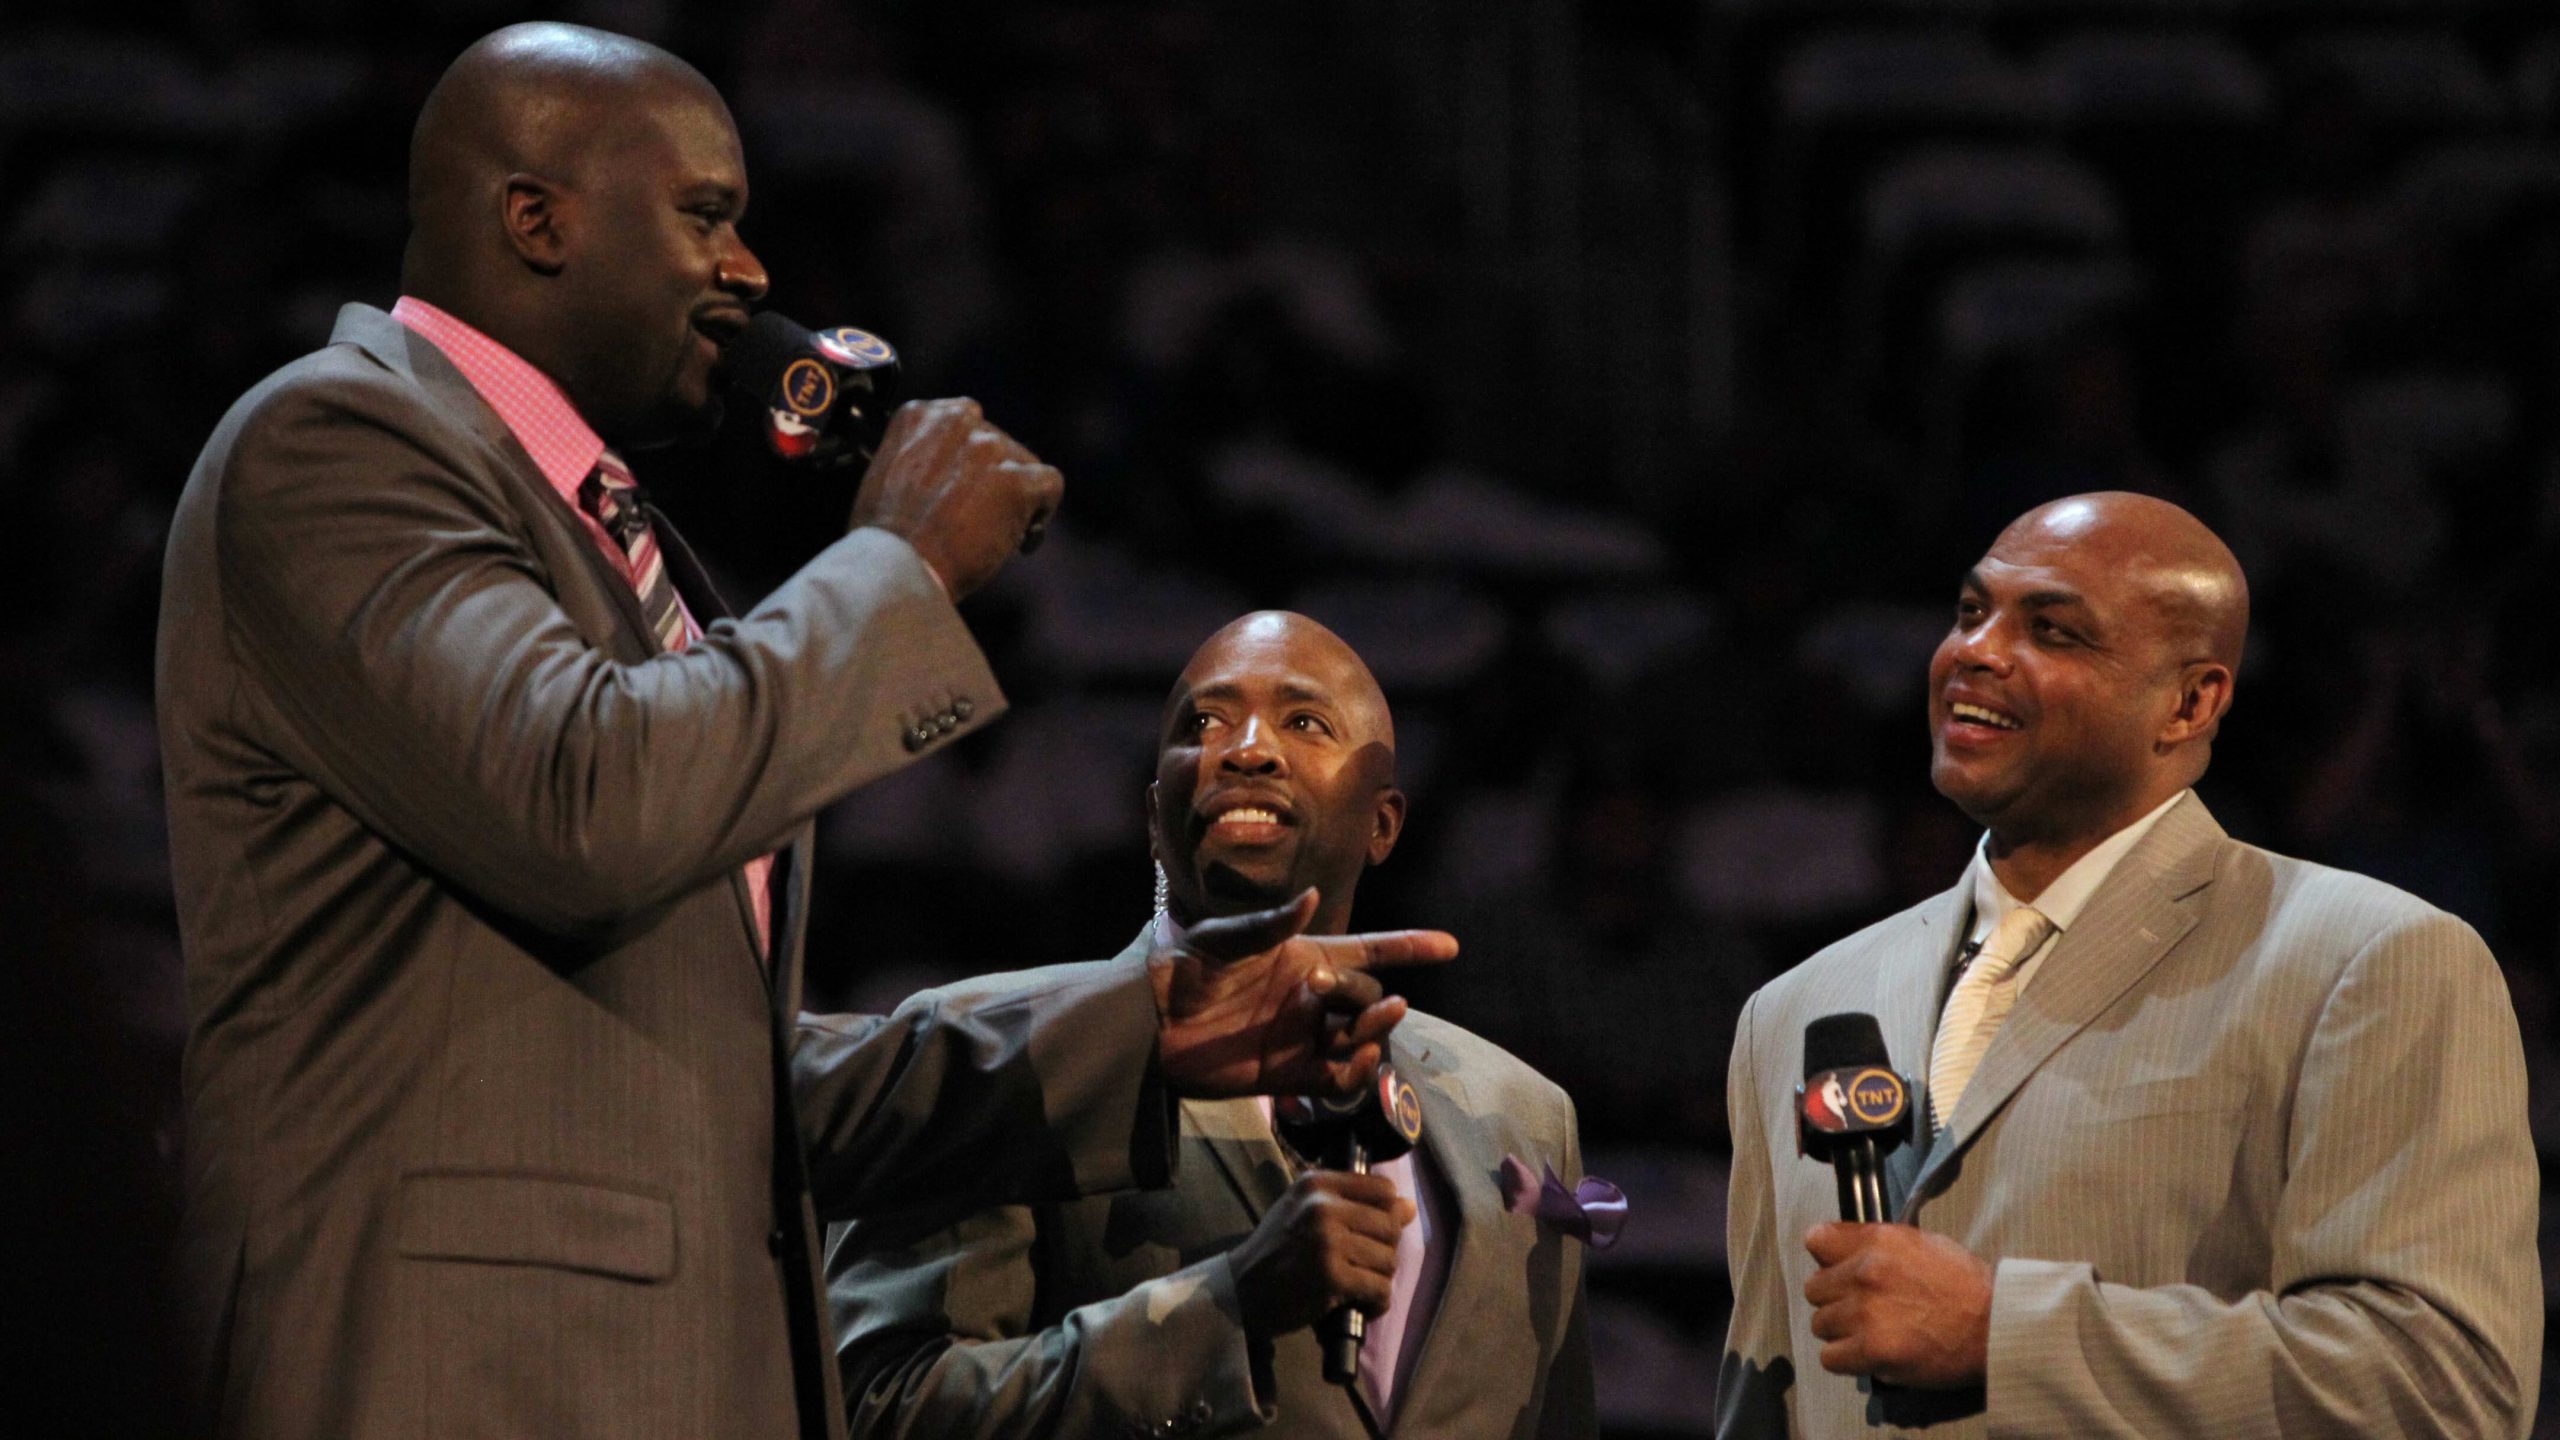 The Future of TNT's Iconic 'Inside the NBA' Is in Major Jeopardy